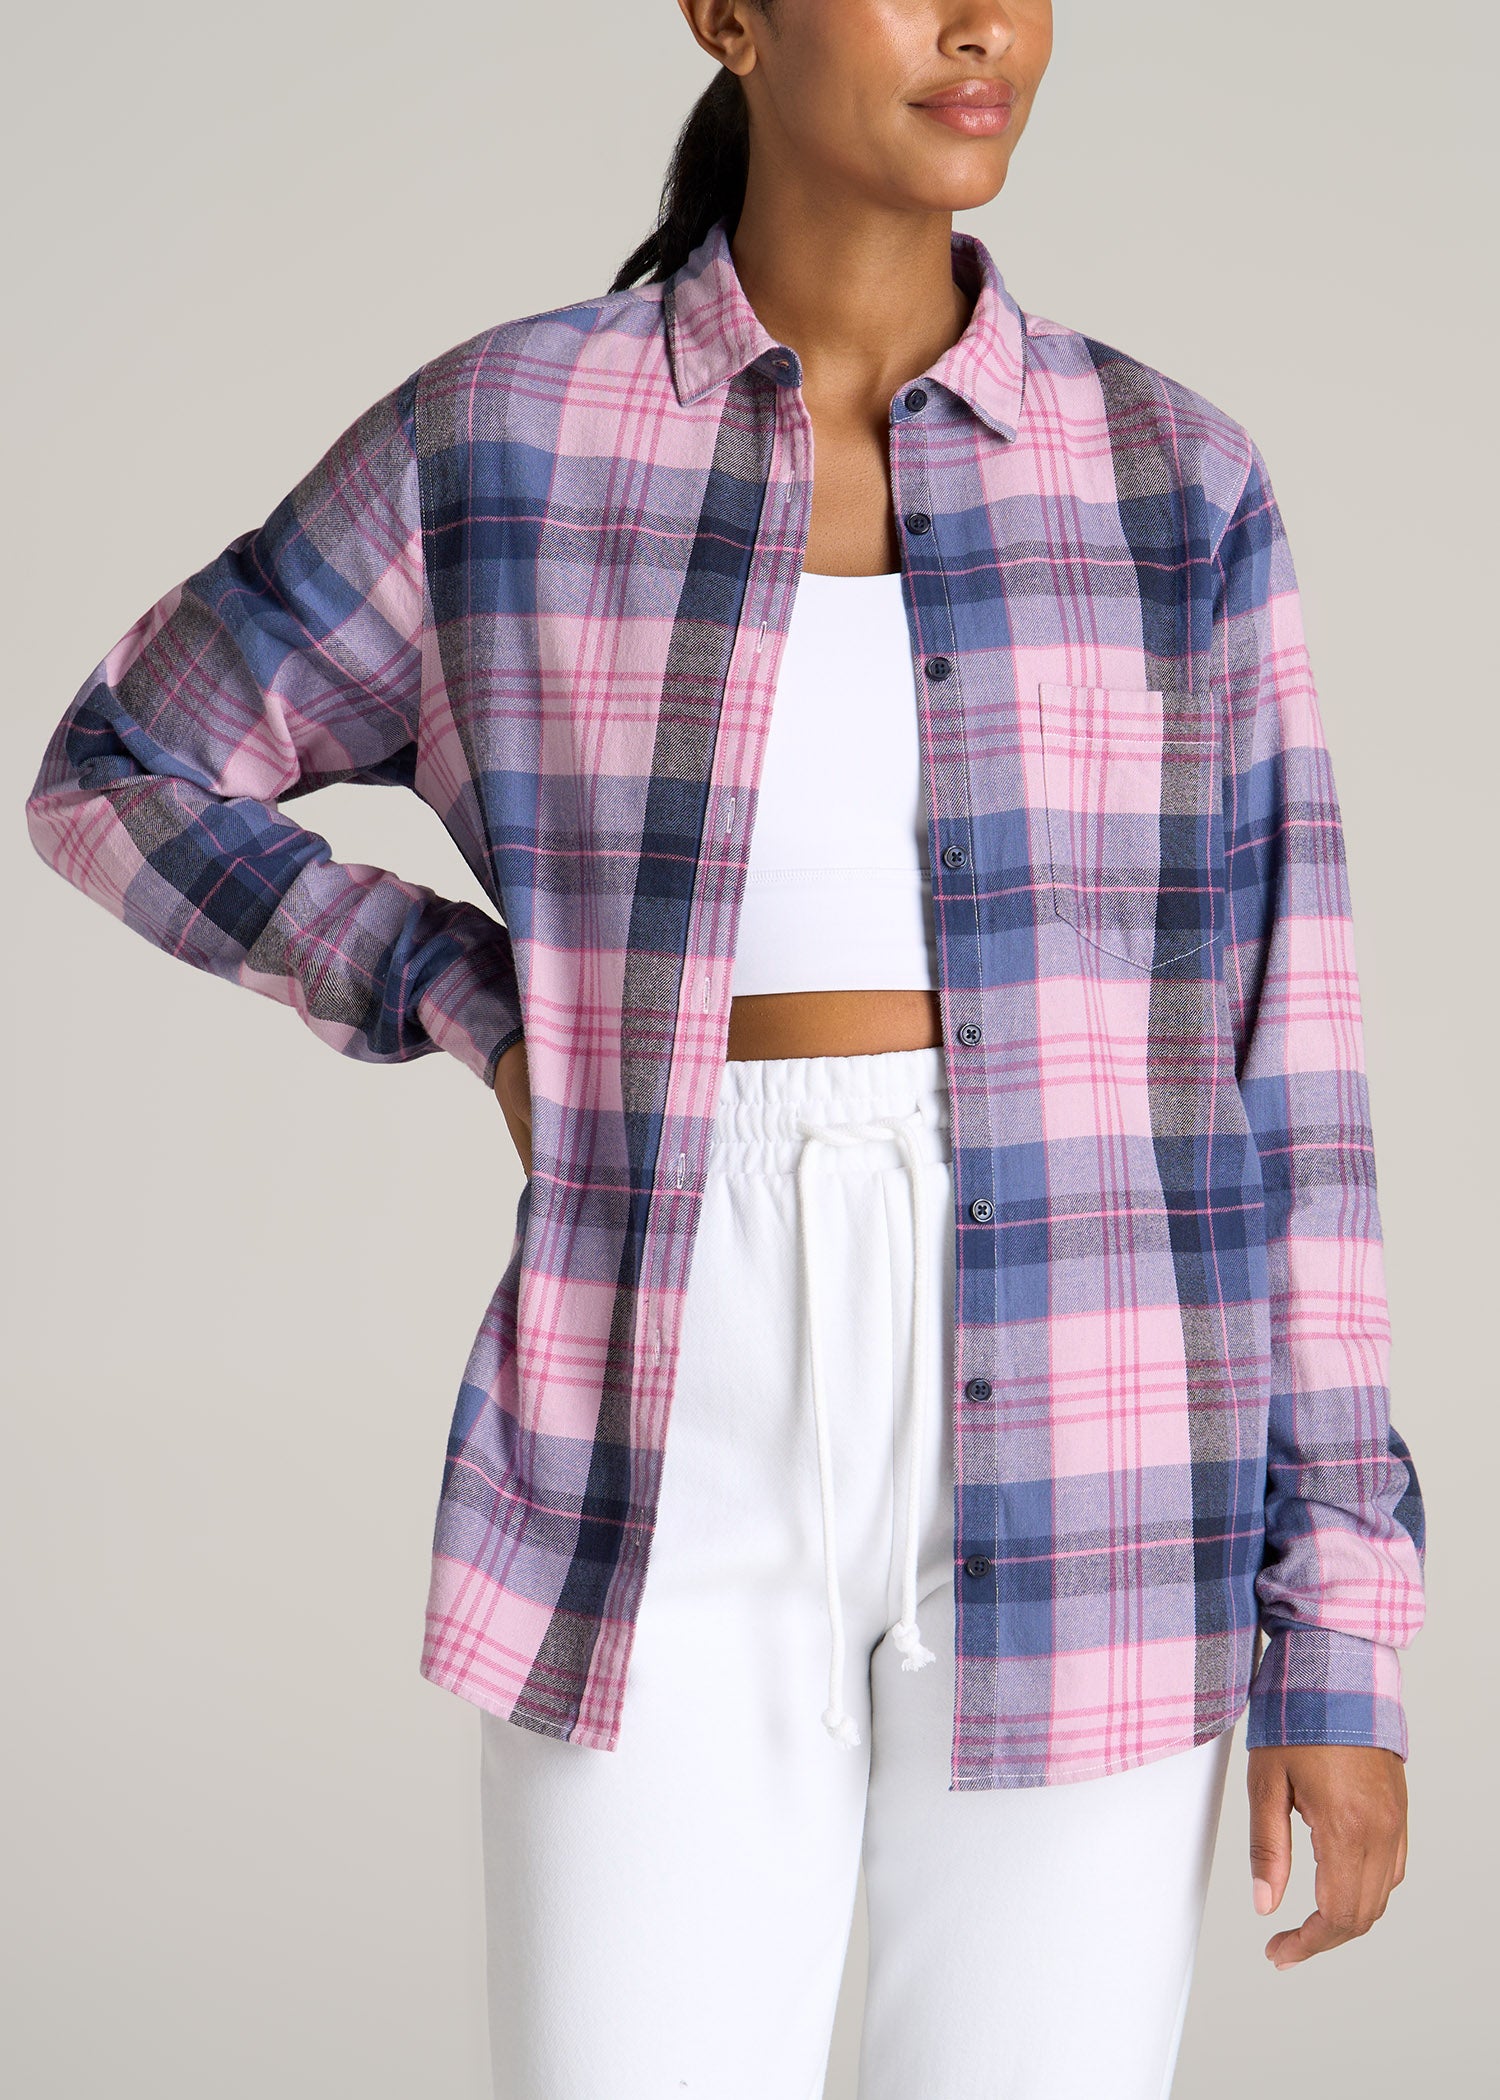 Flannel Button-Up Shirt for Tall Women in Mauve and Blue Plaid M / Tall / Mauve and Blue Plaid